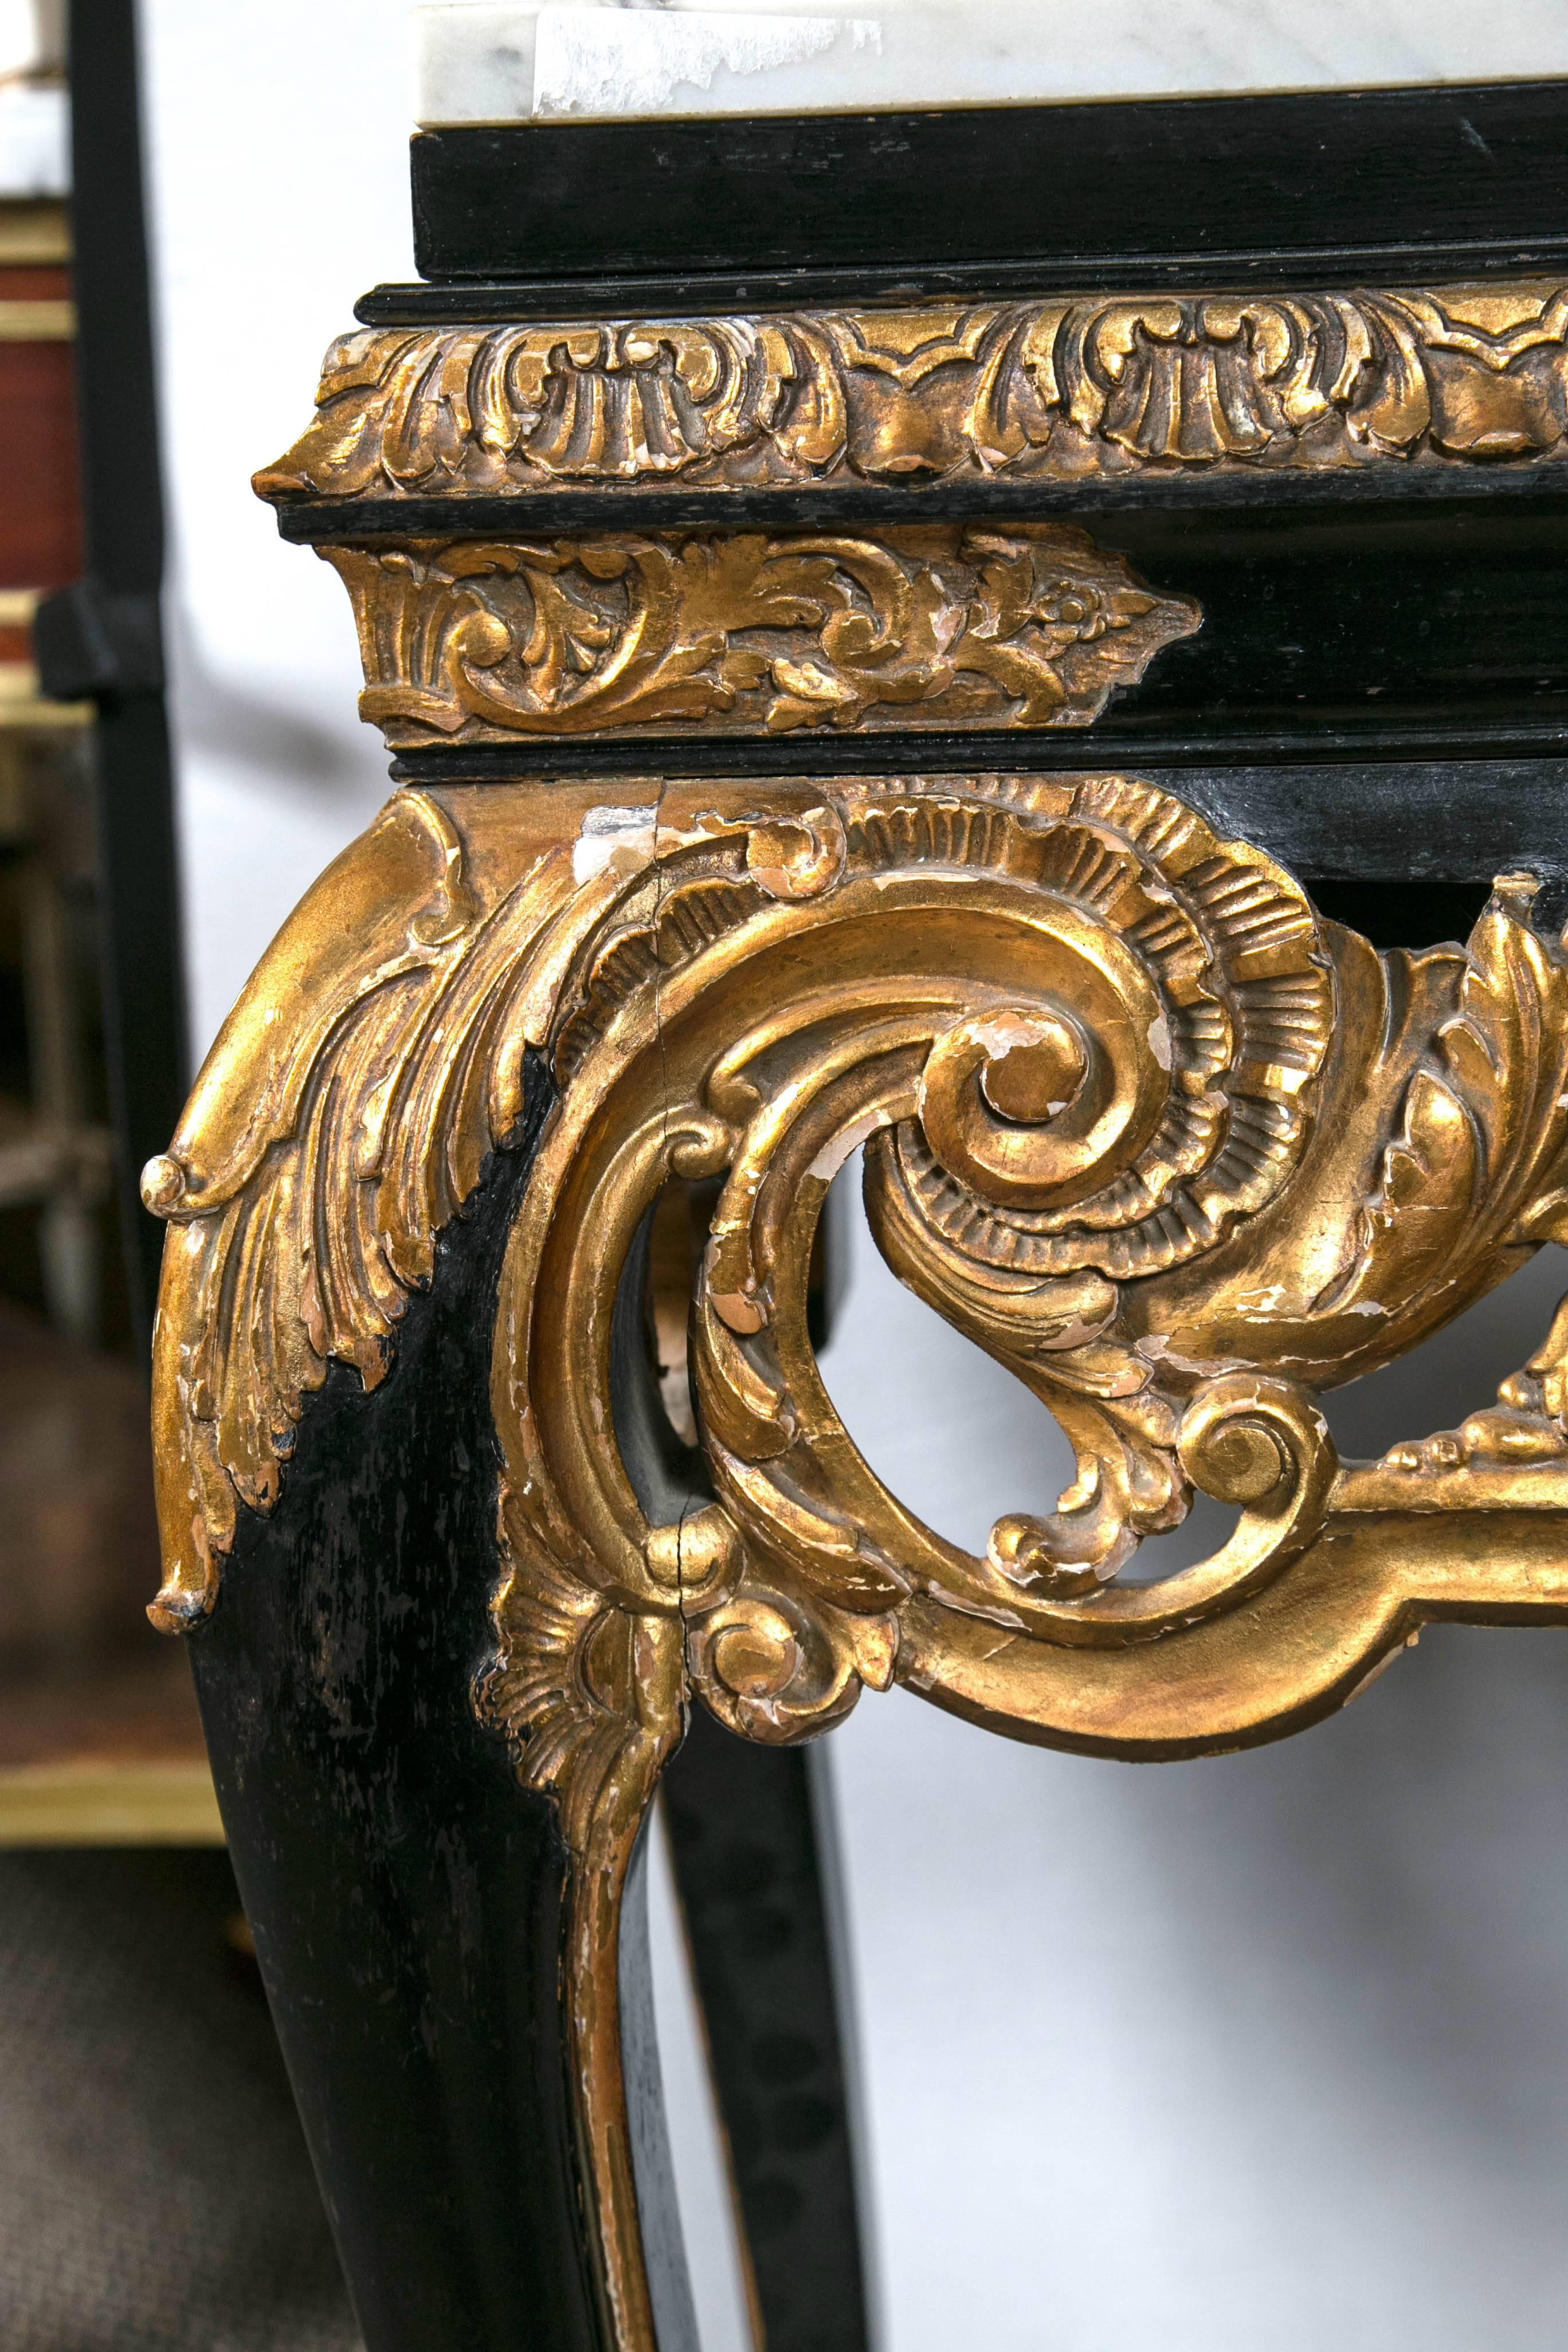 19th Century Gilt and Ebony Decorated Marble-Top Console